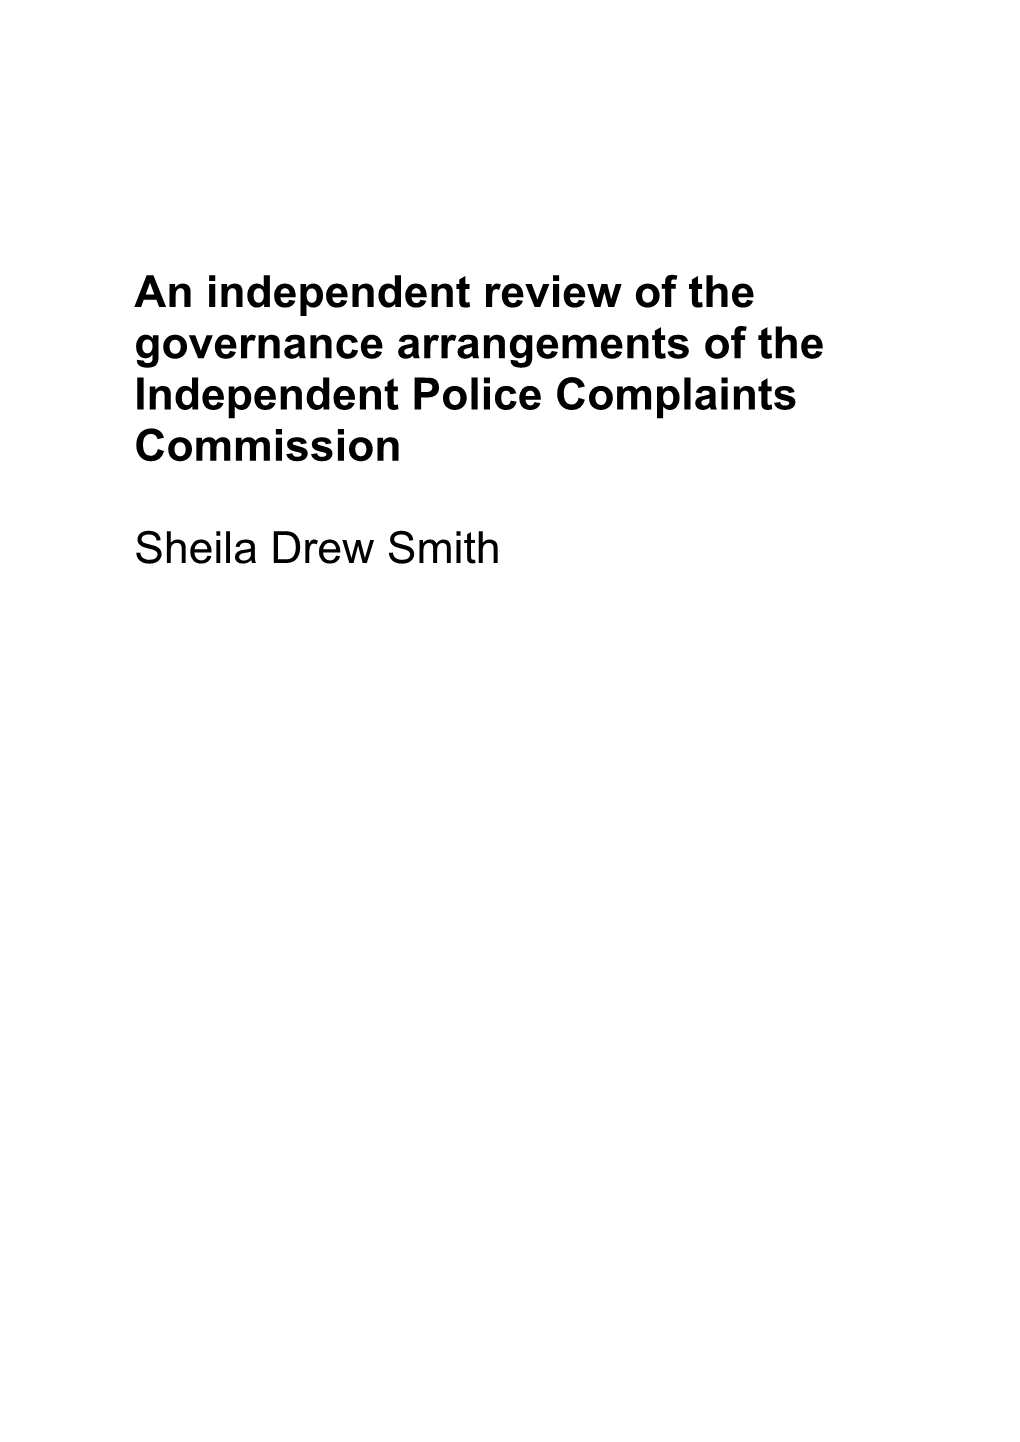 An Independent Review of the Governance Arrangements of the Independent Police Complaints Commission